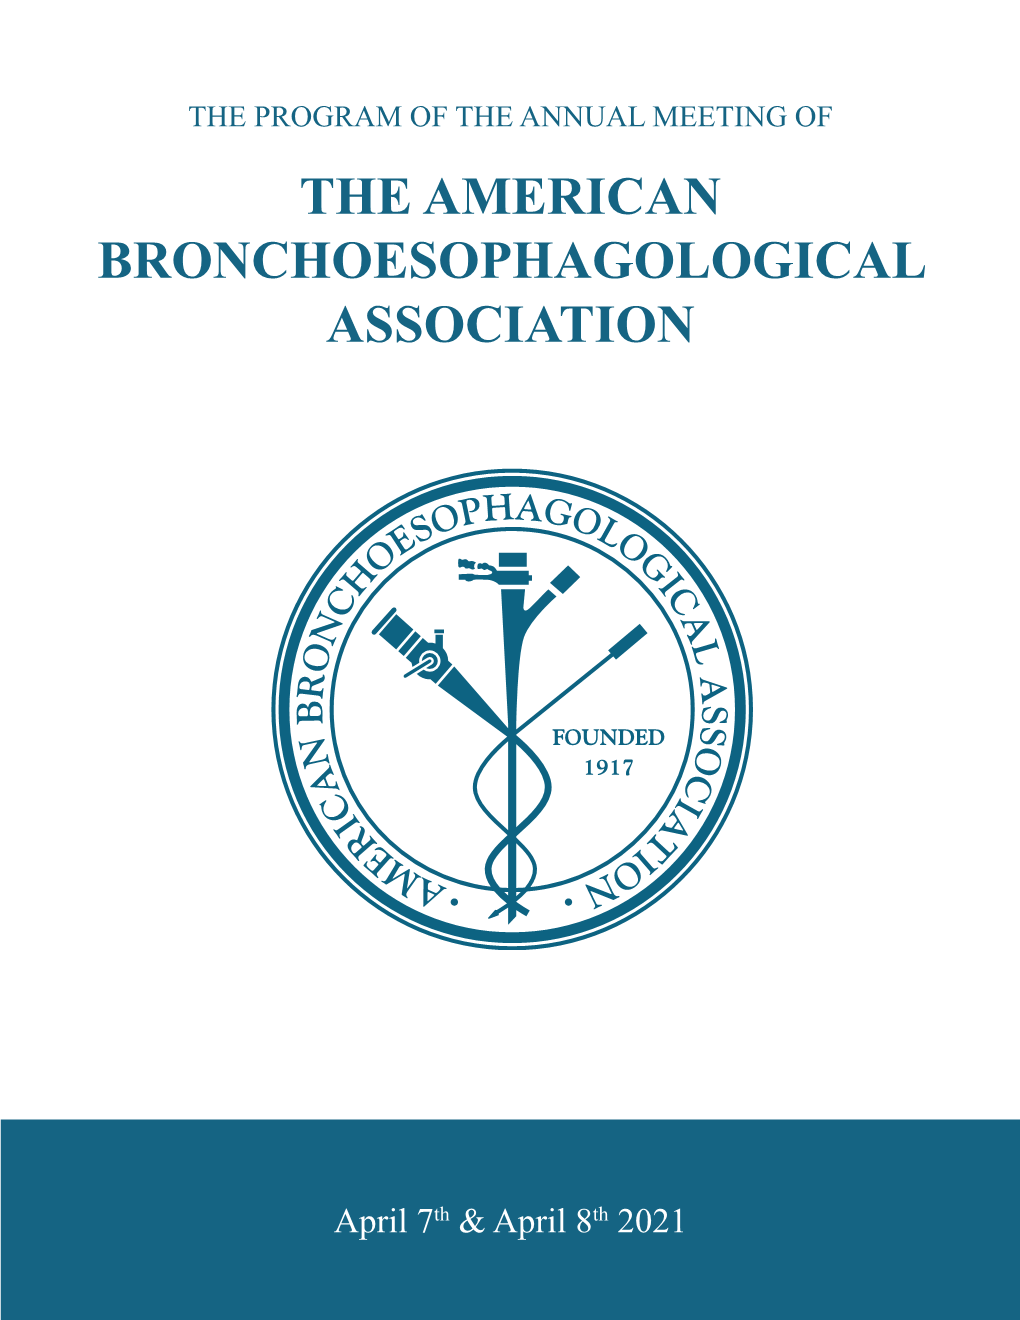 The Program of the Annual Meeting of the American Bronchoesophagological Association